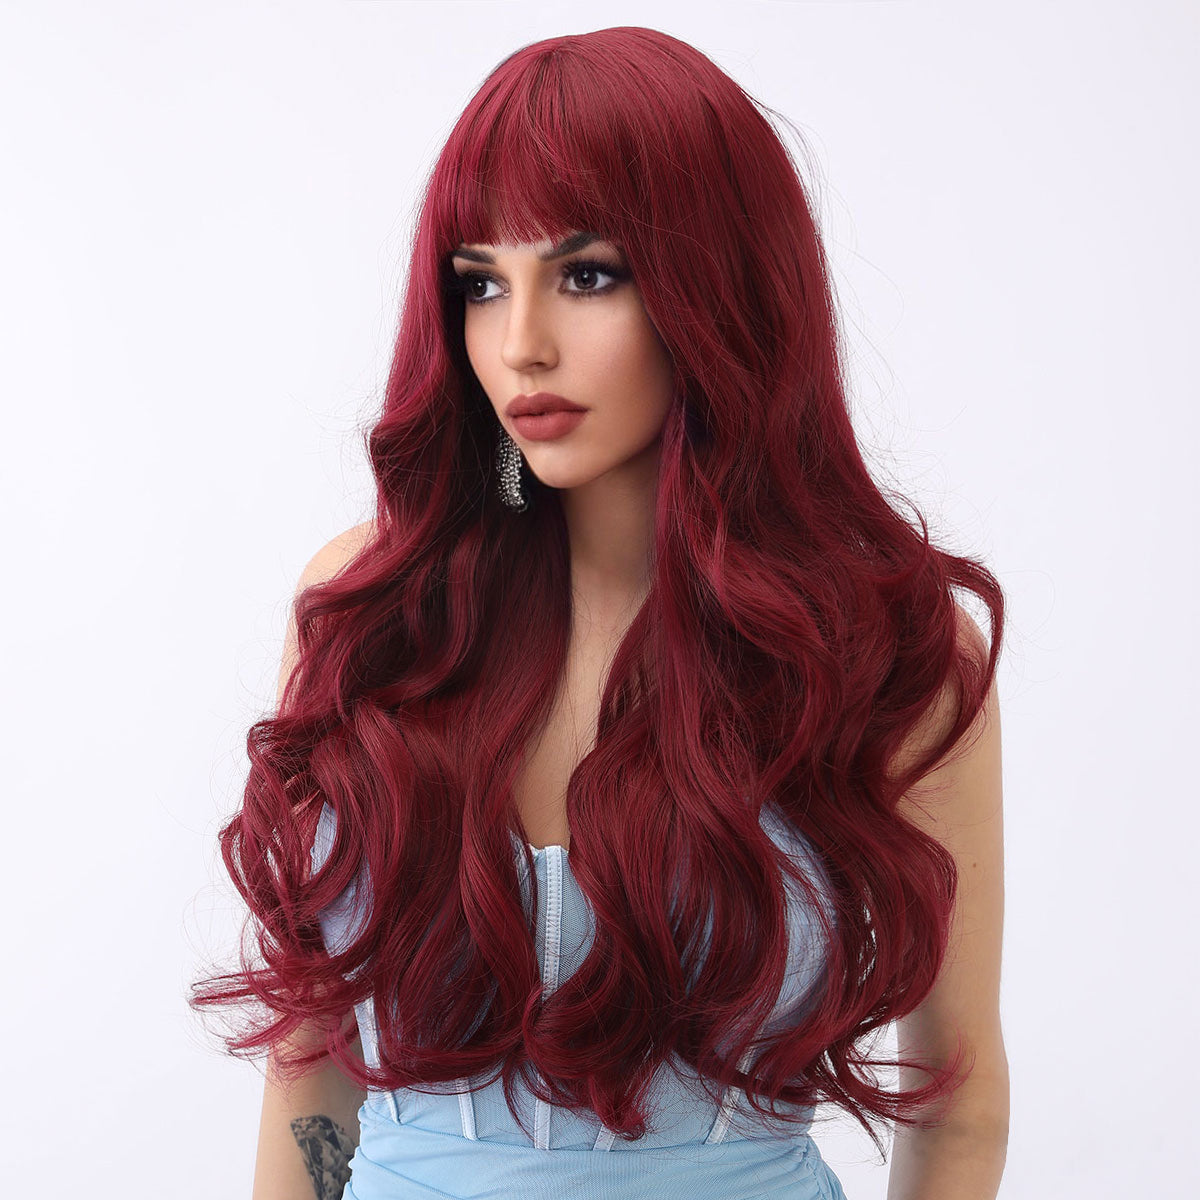 [Midnight Cherry] 26-inch Wine Red Loose Wave with Bangs (Synthetic Wig)